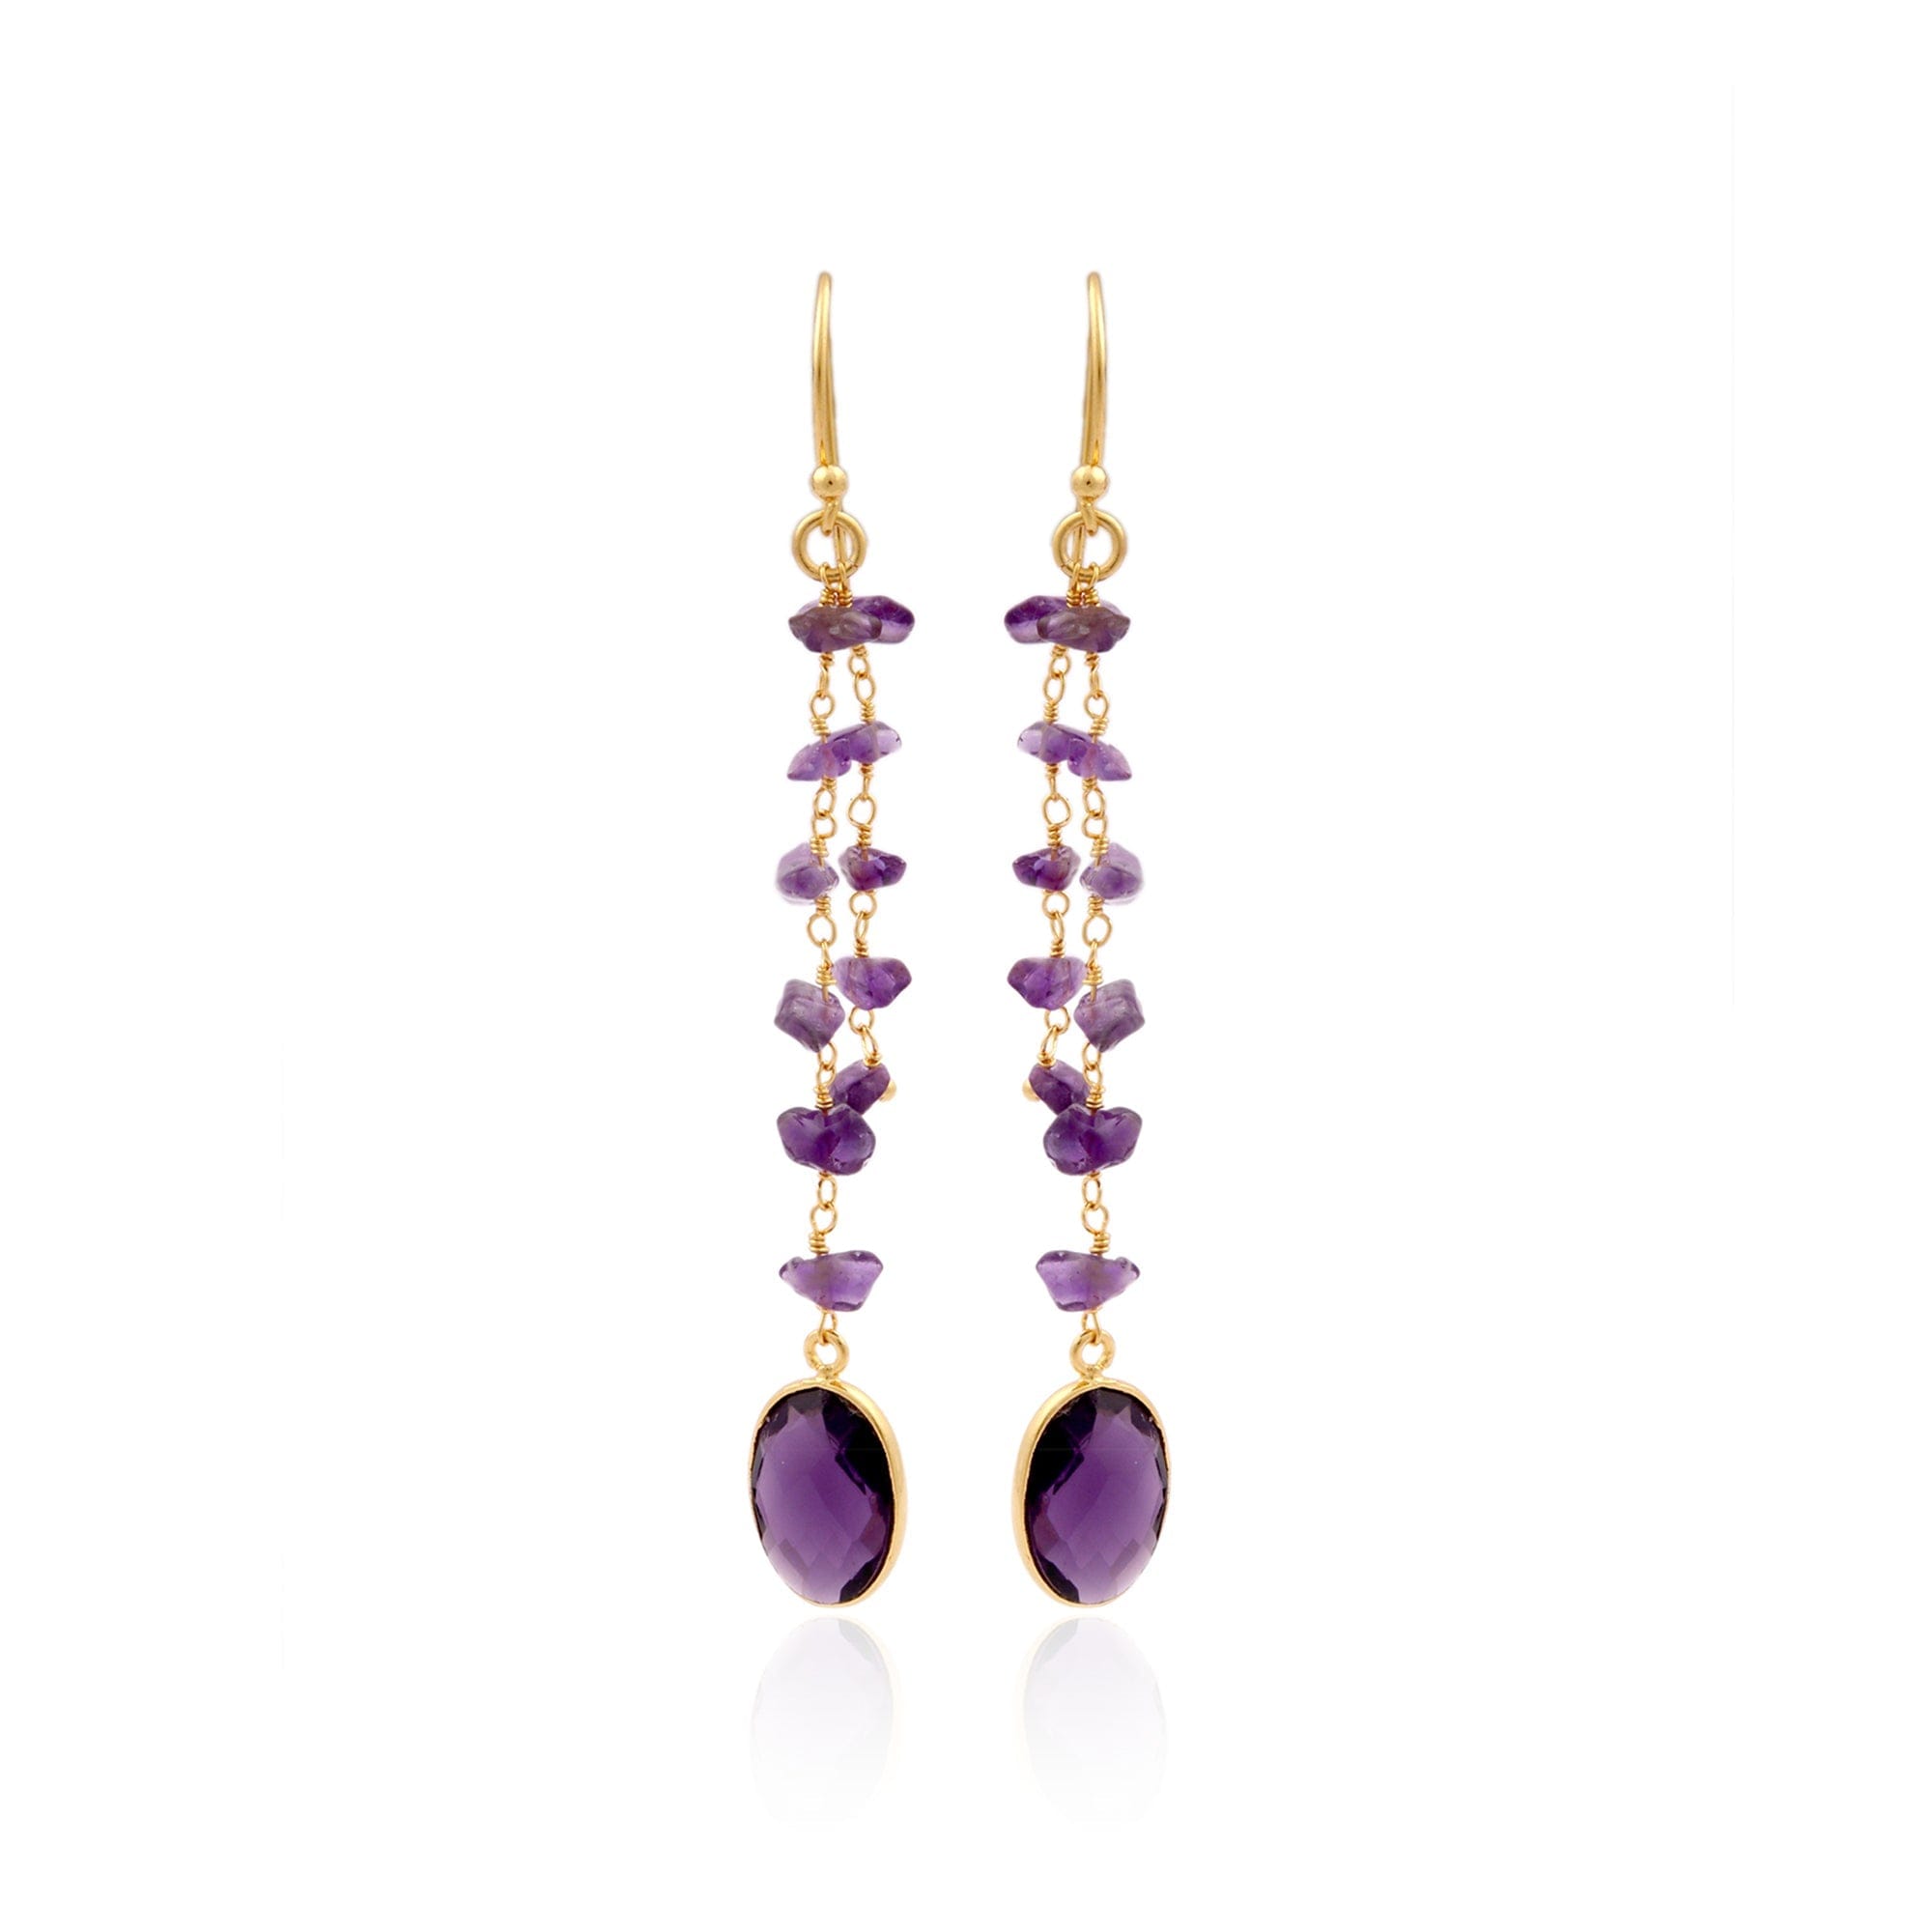 Linear drop earring with Amythest Gemstone. Gold tone.